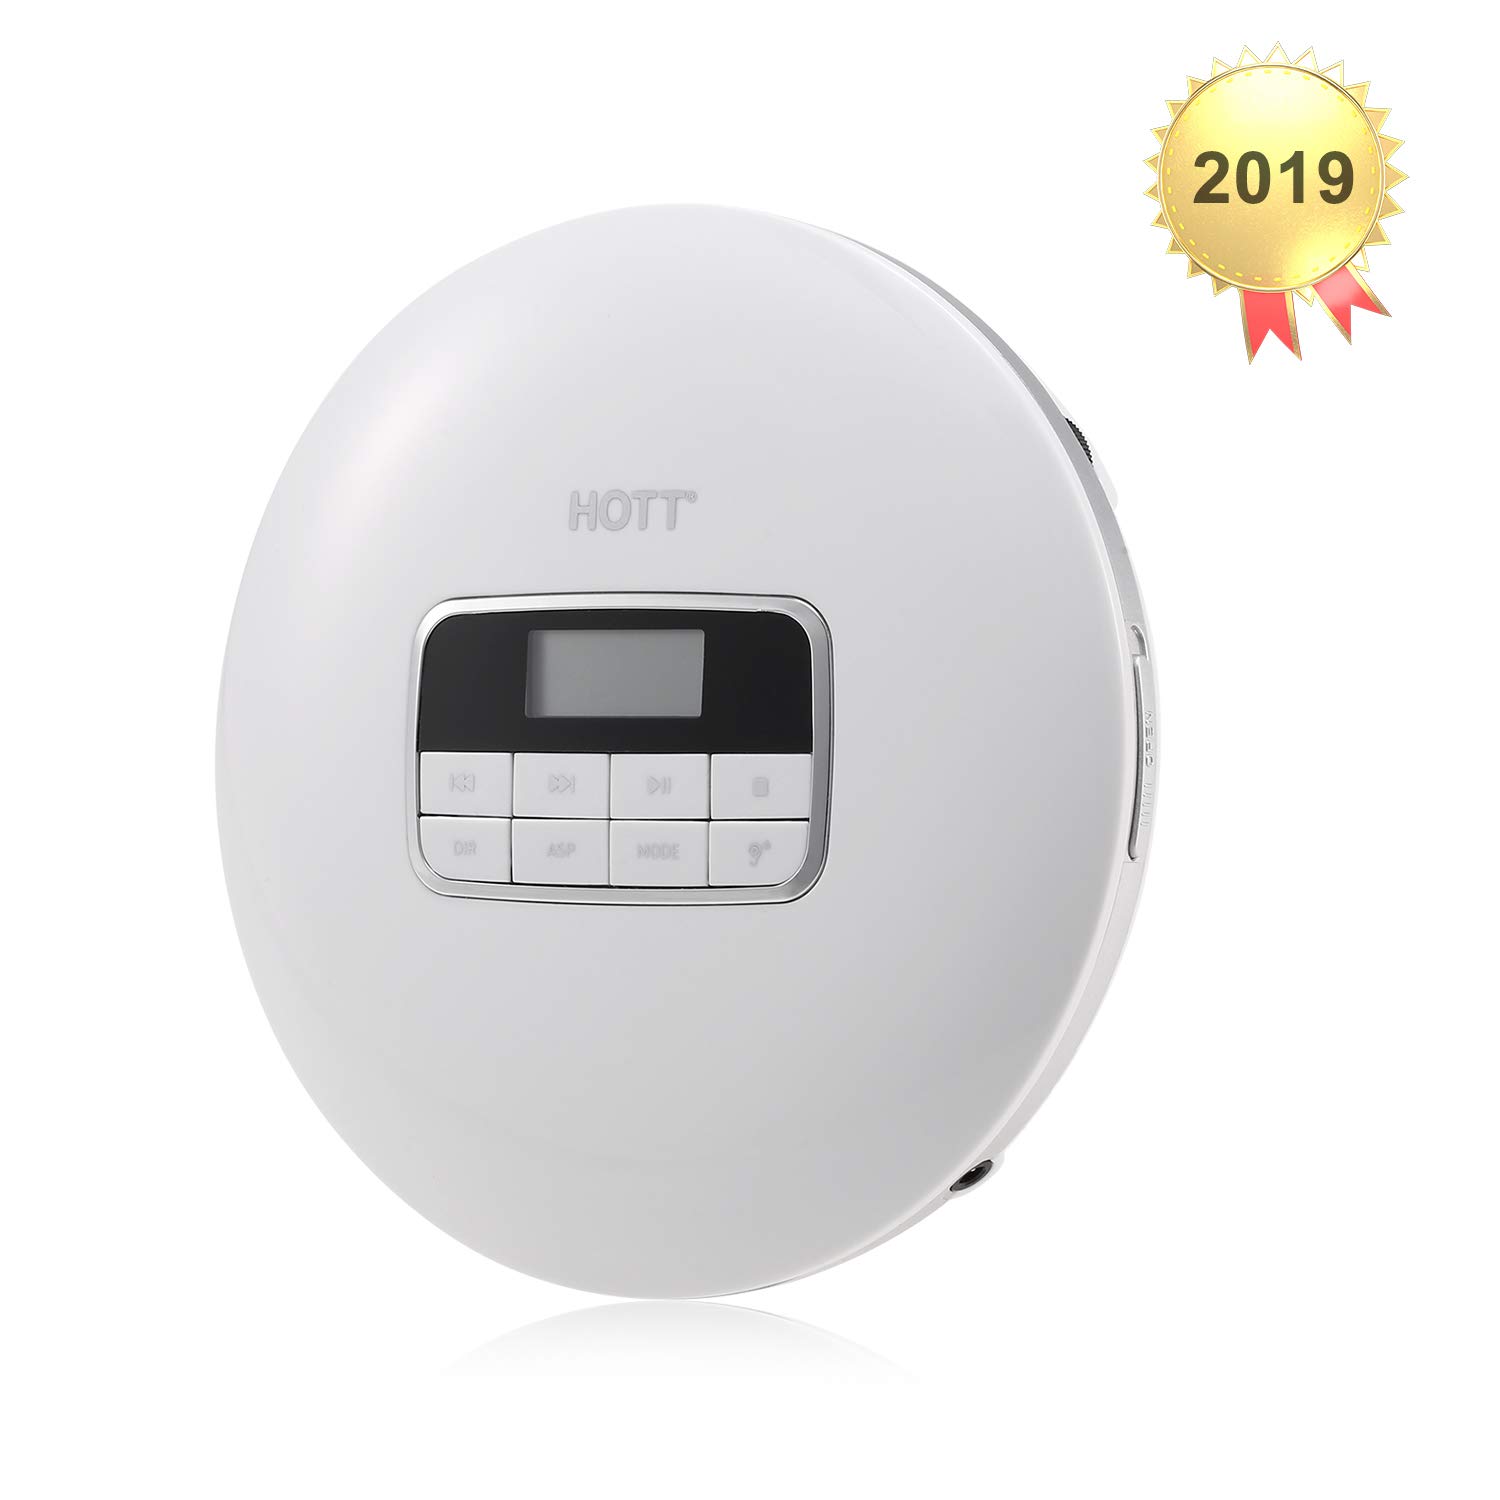 HOTT Portable CD Player Personal Compact Discman CD Player Small Walkman MP3 Disc Music CD Player (White) - image 1 of 7